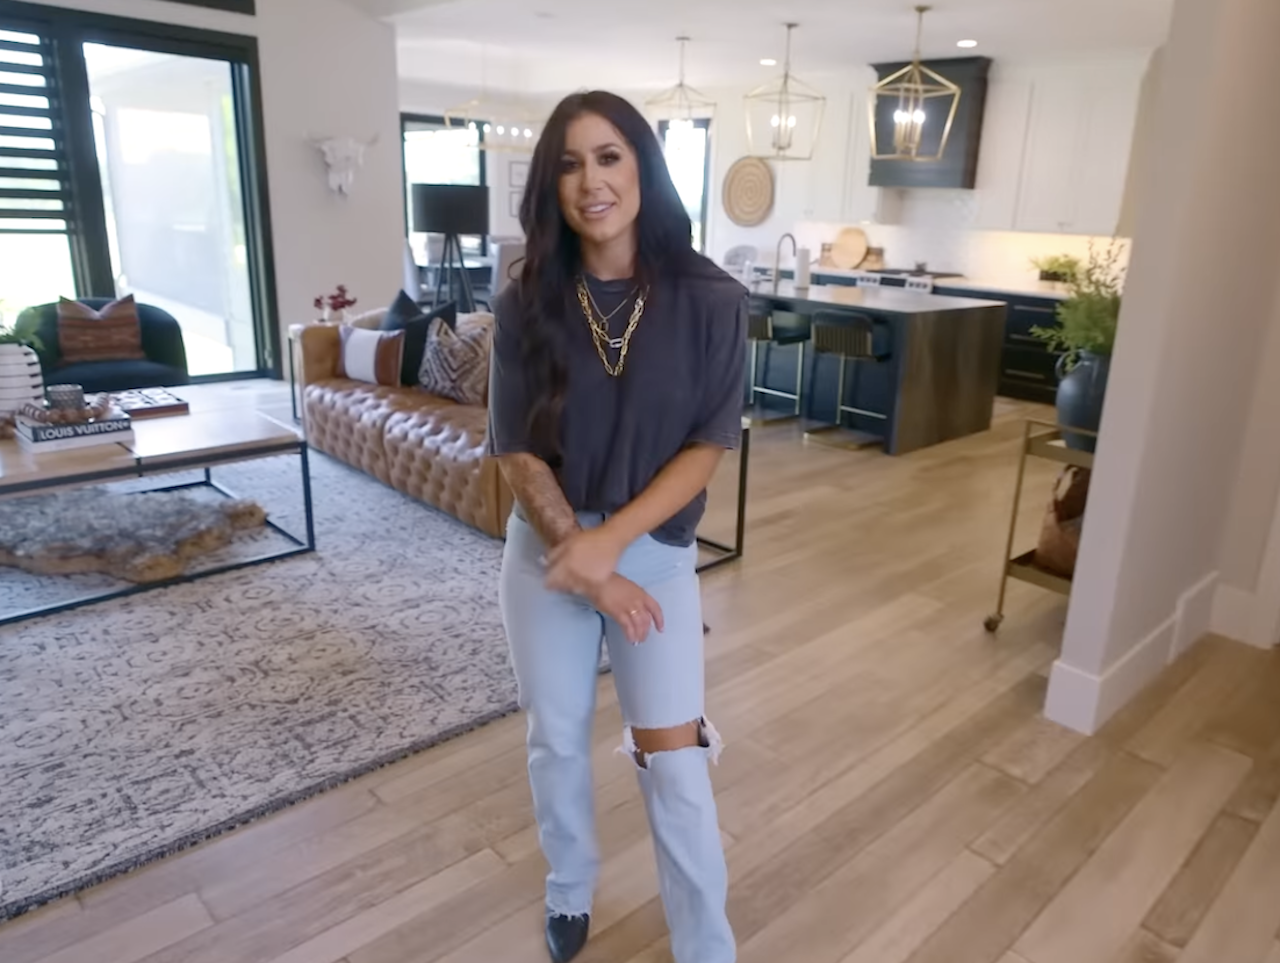 Chelsea DeBoer, host of 'Down Home Fab' on HGTV, hosts a tour of her home.